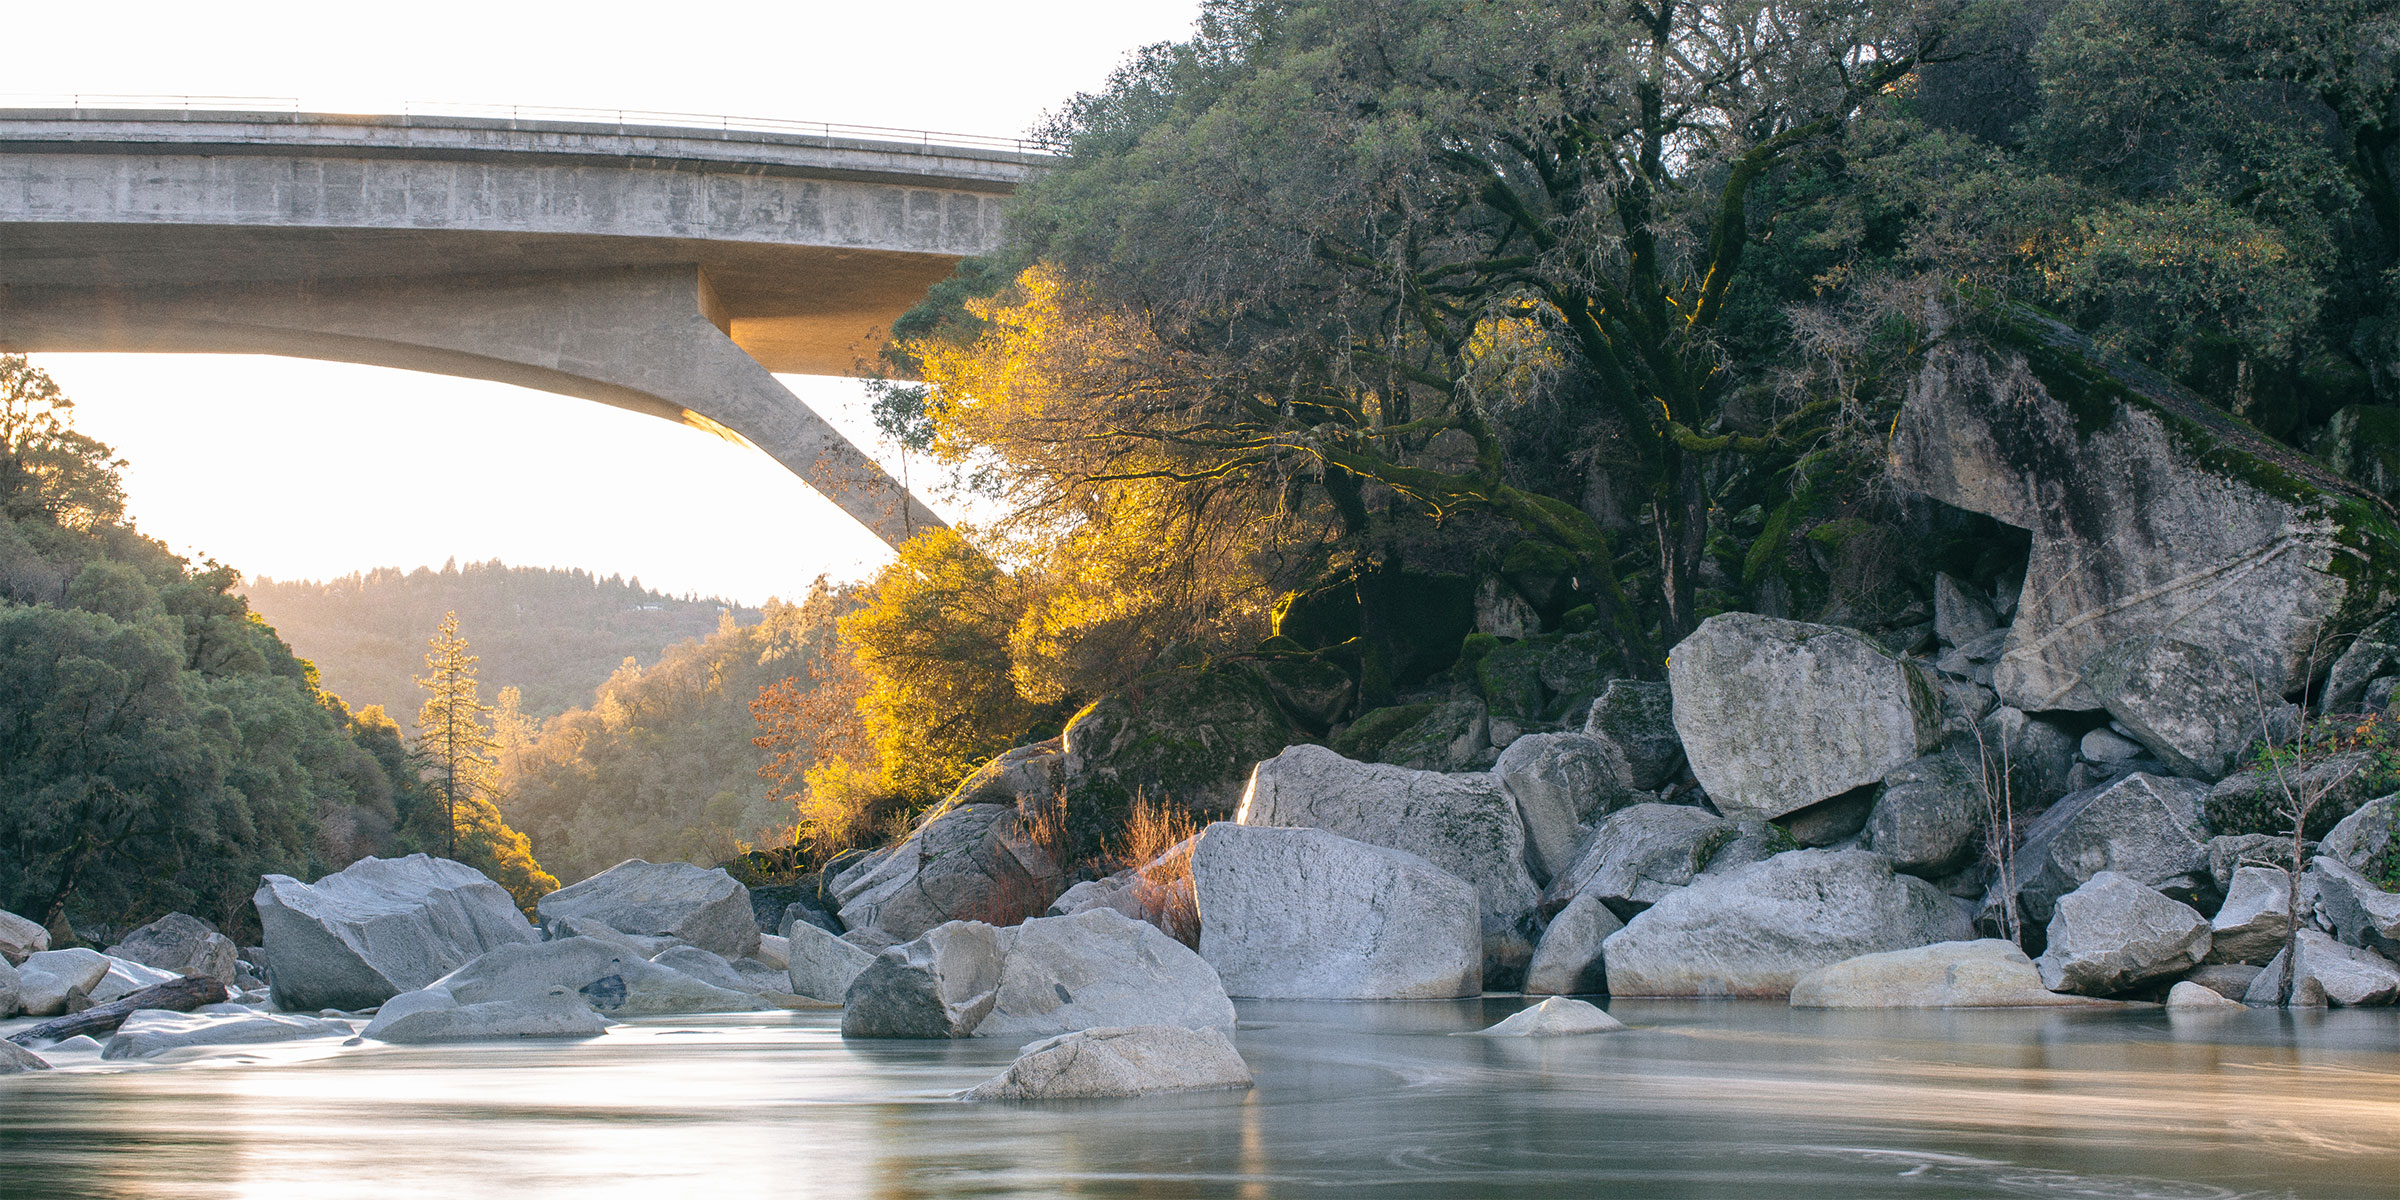 Long-exposure photo of the South Yuba River at golden hour, showing the water flowing around rocks and under a bridge, with trees on the right side bank